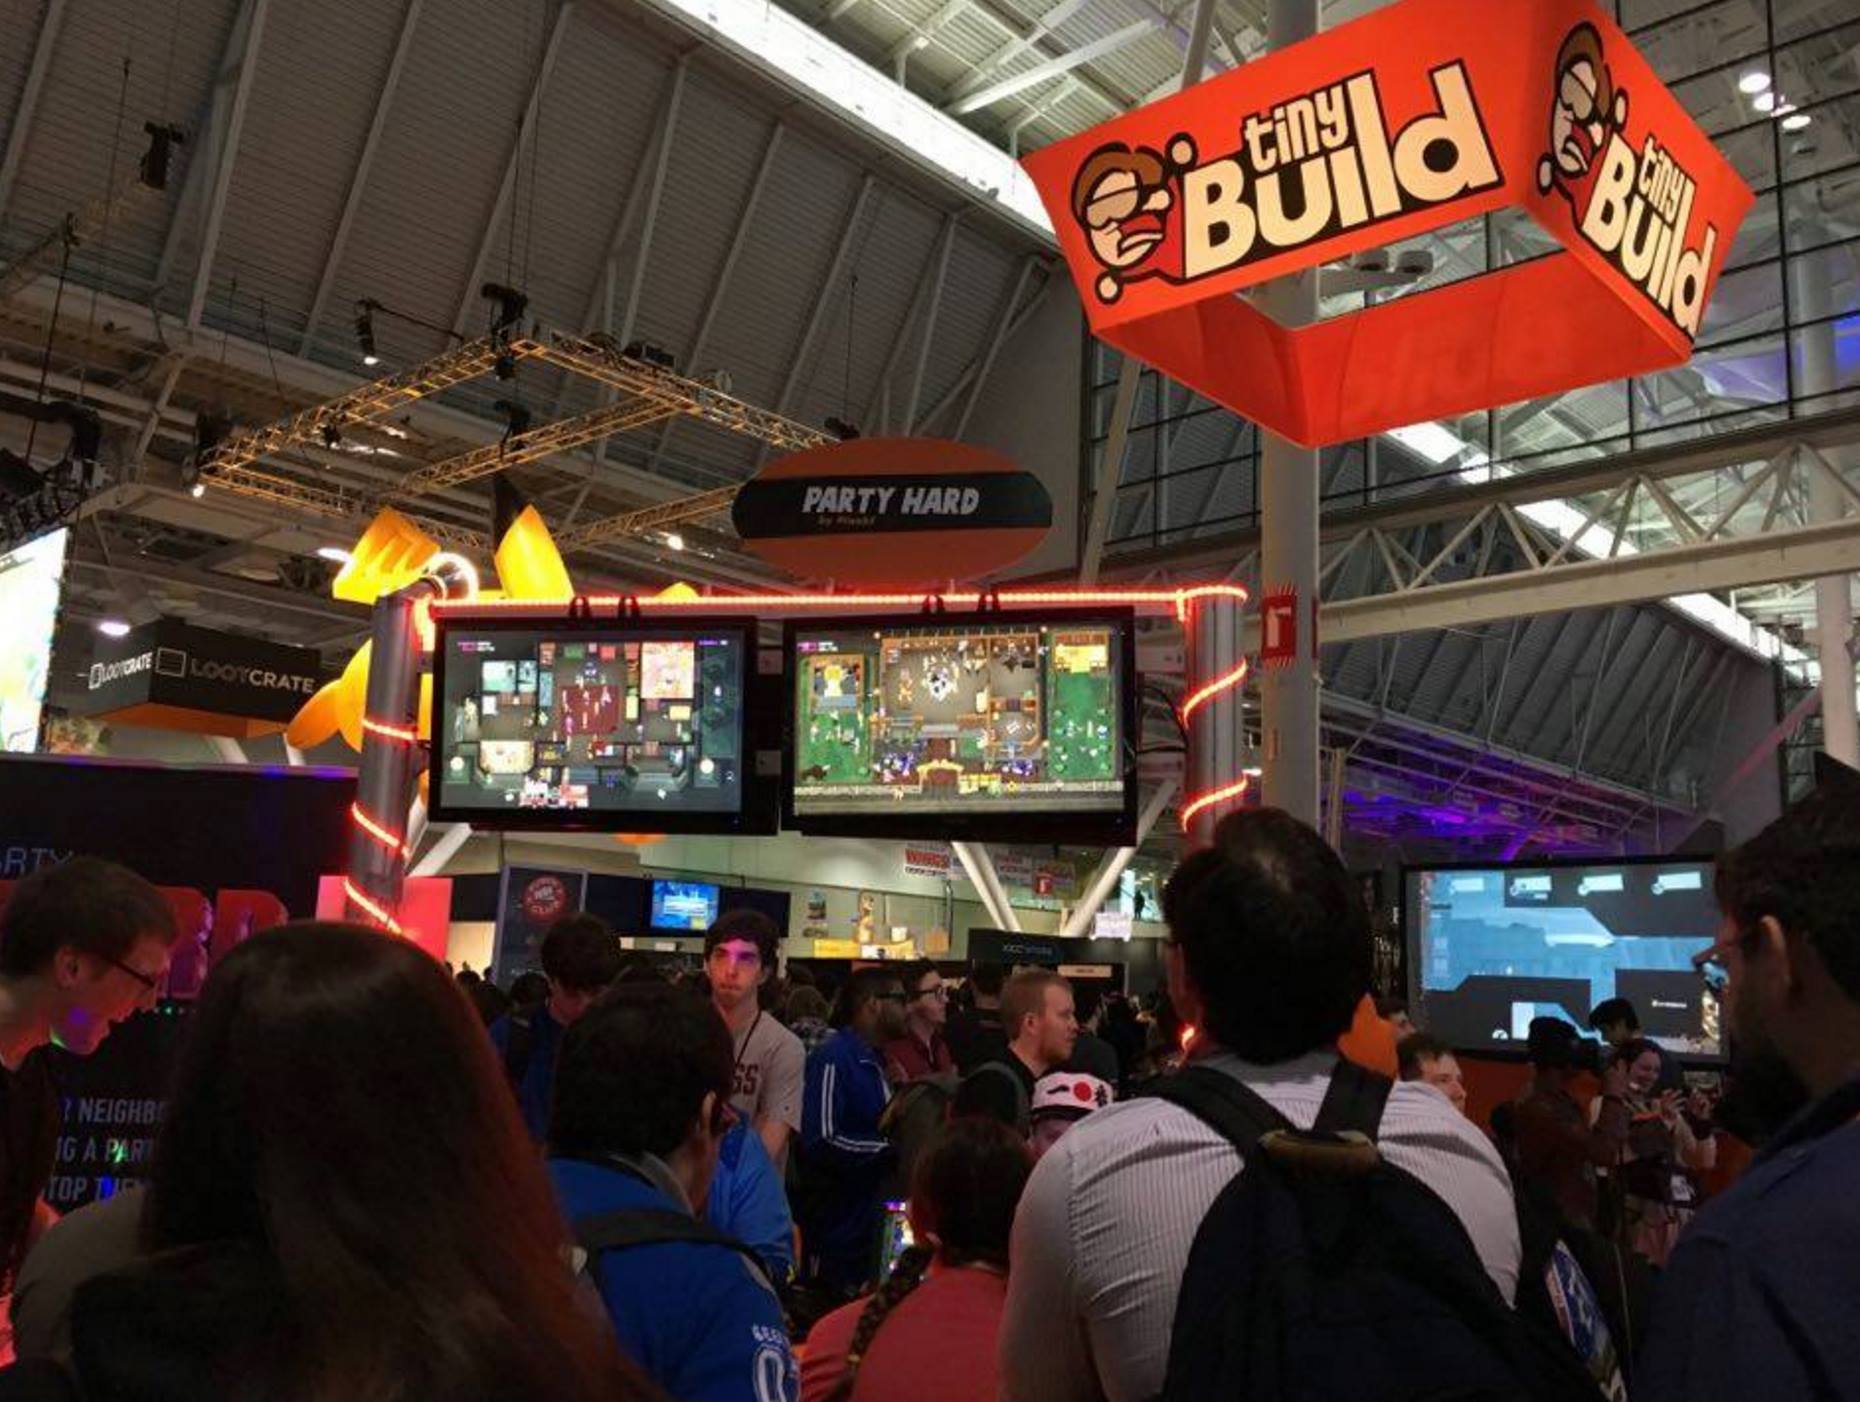 Guide to PAX and Game Conventions by tinyBuild